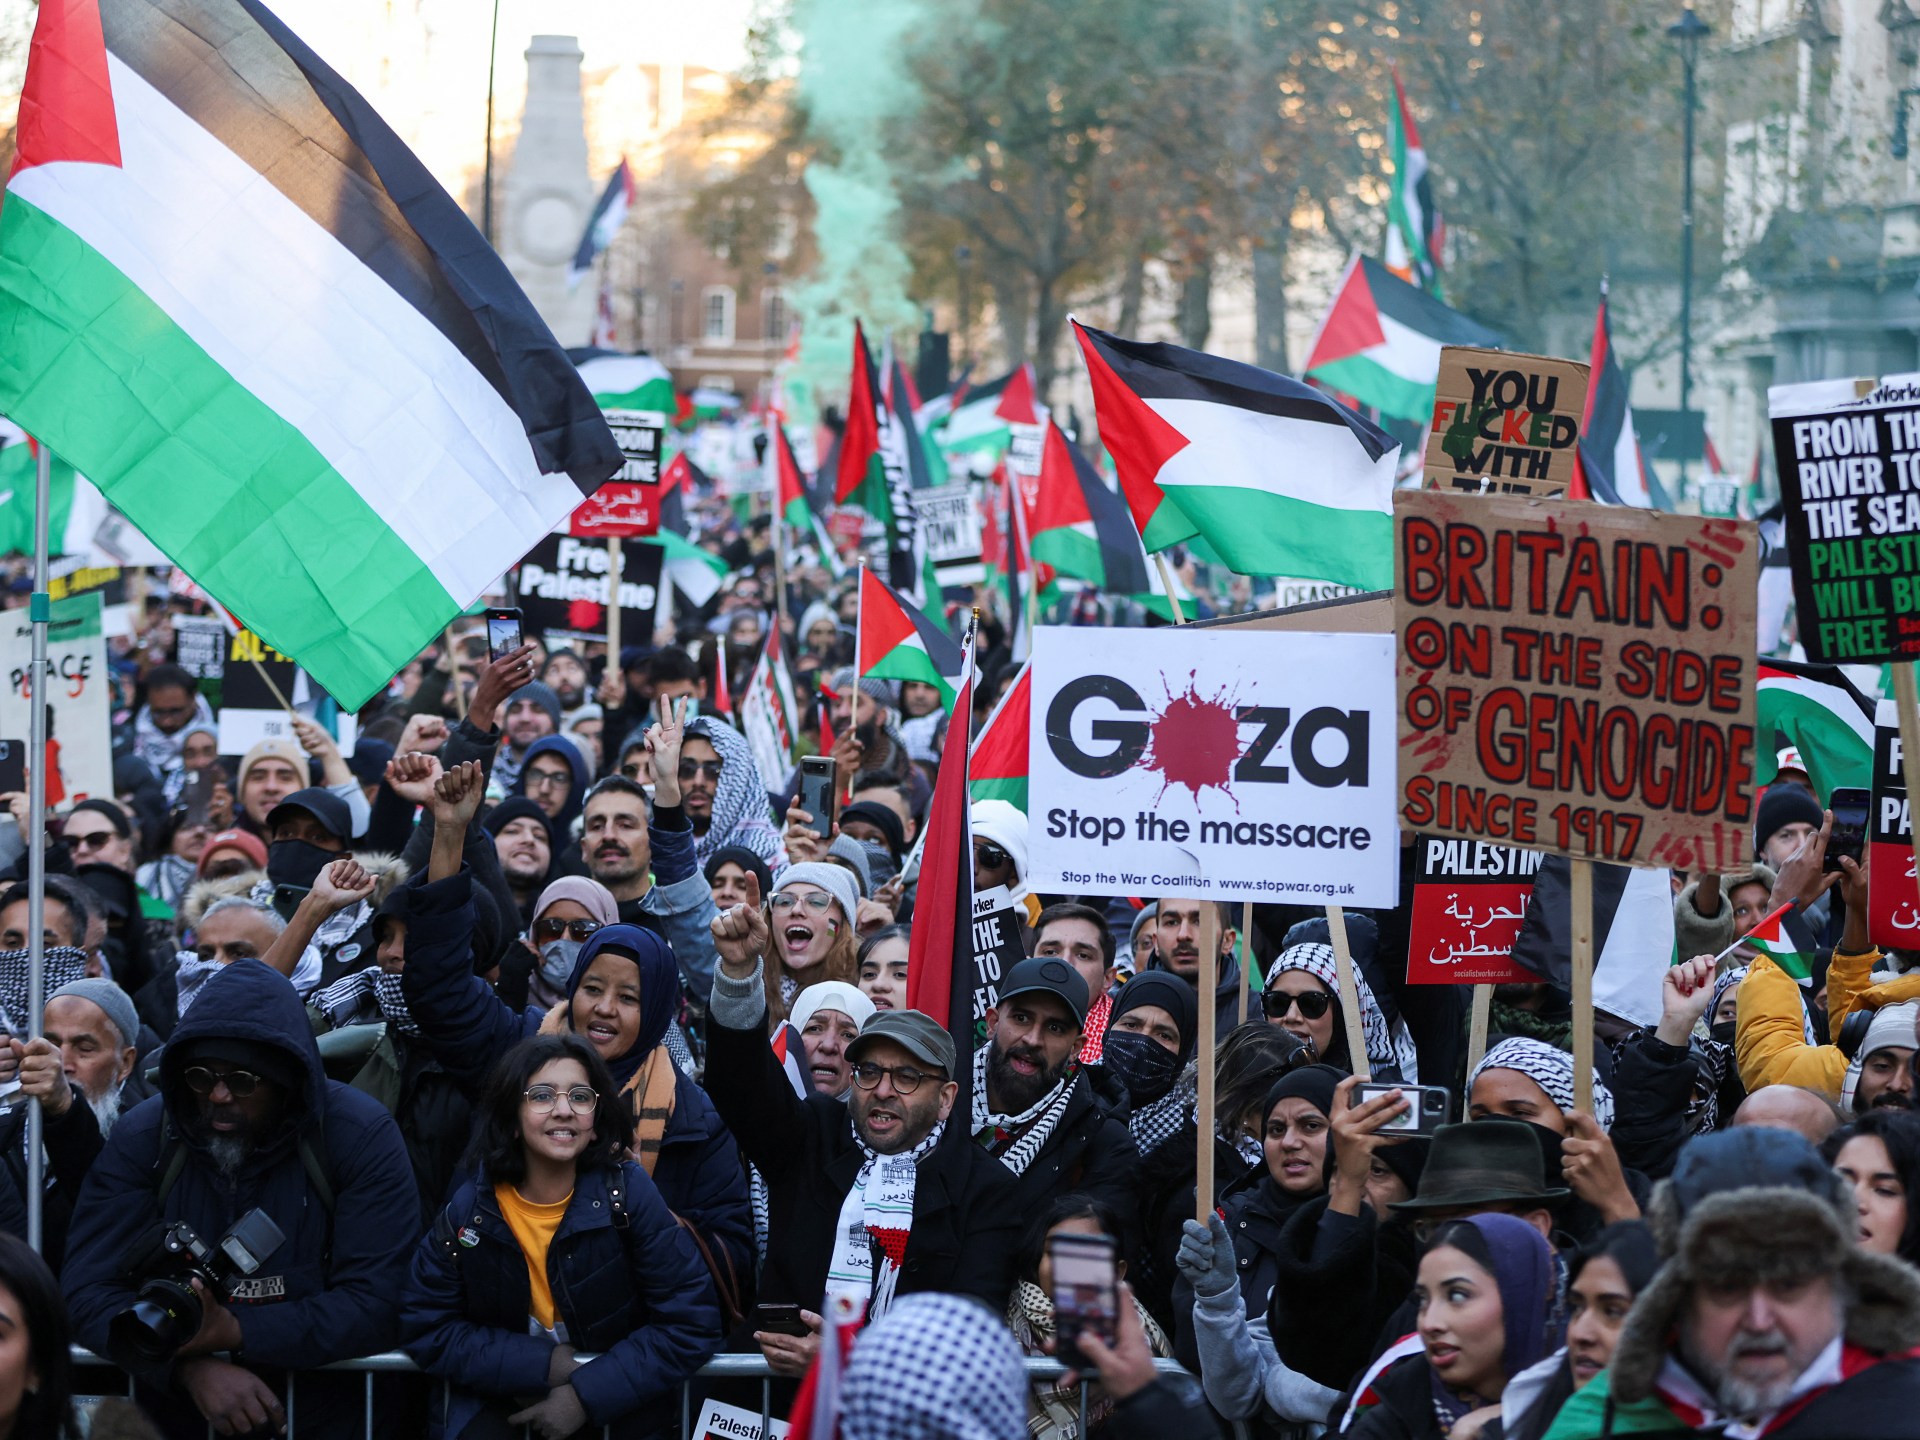 London protesters at pro-Palestinian march demand permanent Gaza ceasefire | Israel-Palestine conflict News